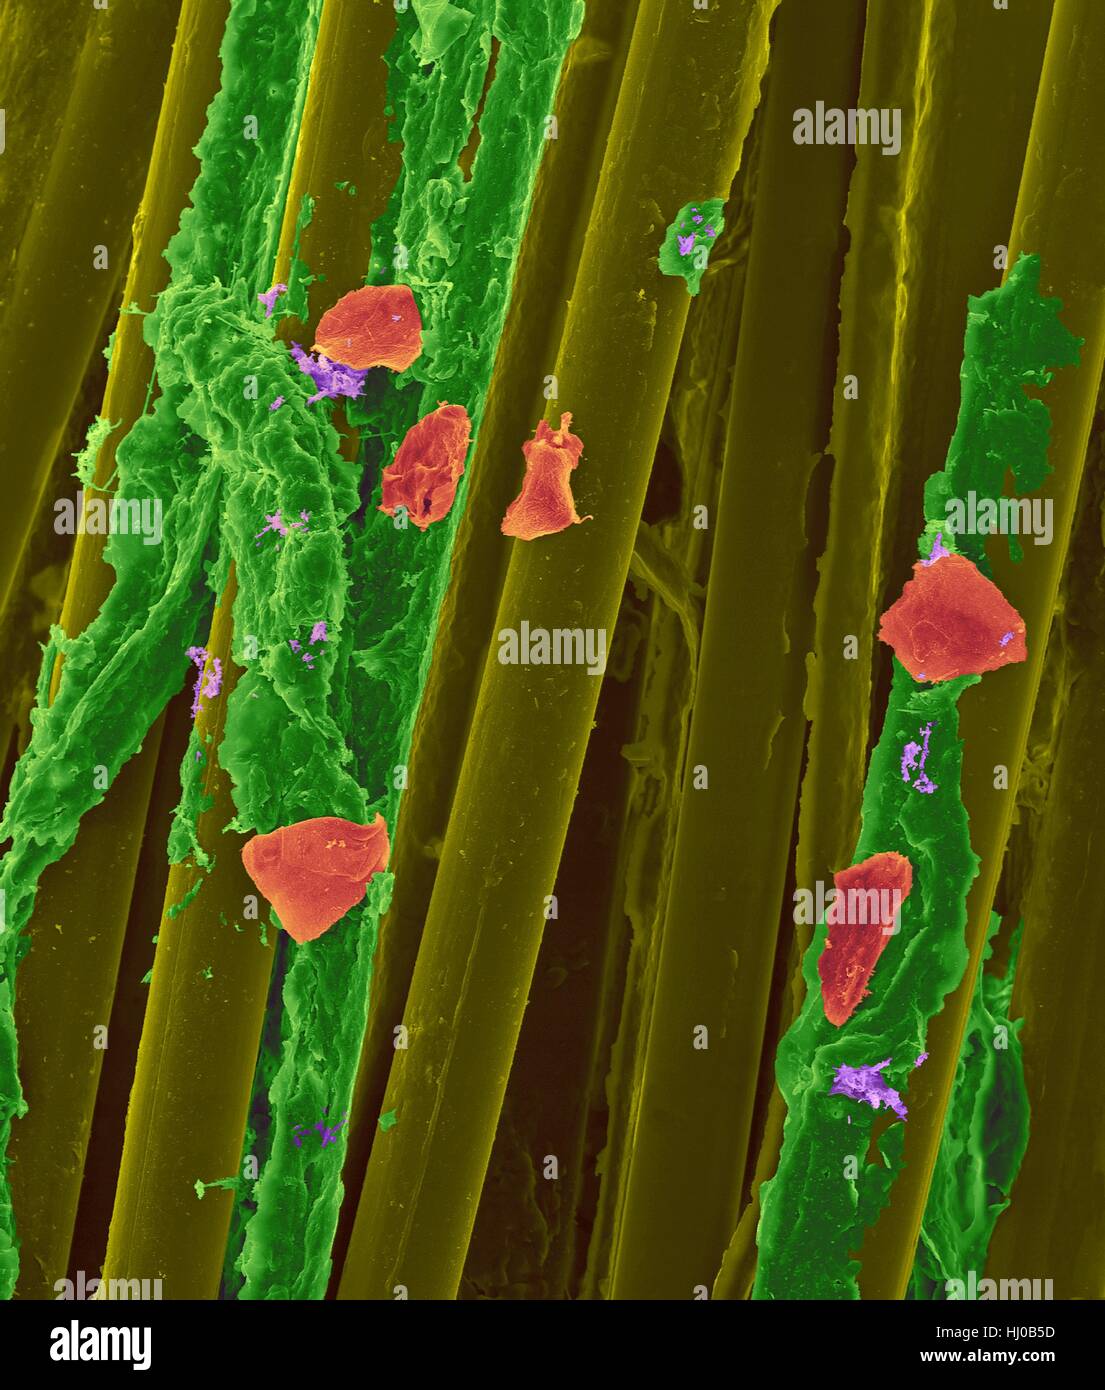 Used wax dental floss with dental plaque (green),bacteria (purple) cheek cells (red) on dental floss fibres (yellow),coloured scanning electron micrograph (SEM).Plaque consists of biofilm of bacteria embedded in glycoprotein matrix.The matrix is formed from bacterial secretions saliva.The Stock Photo